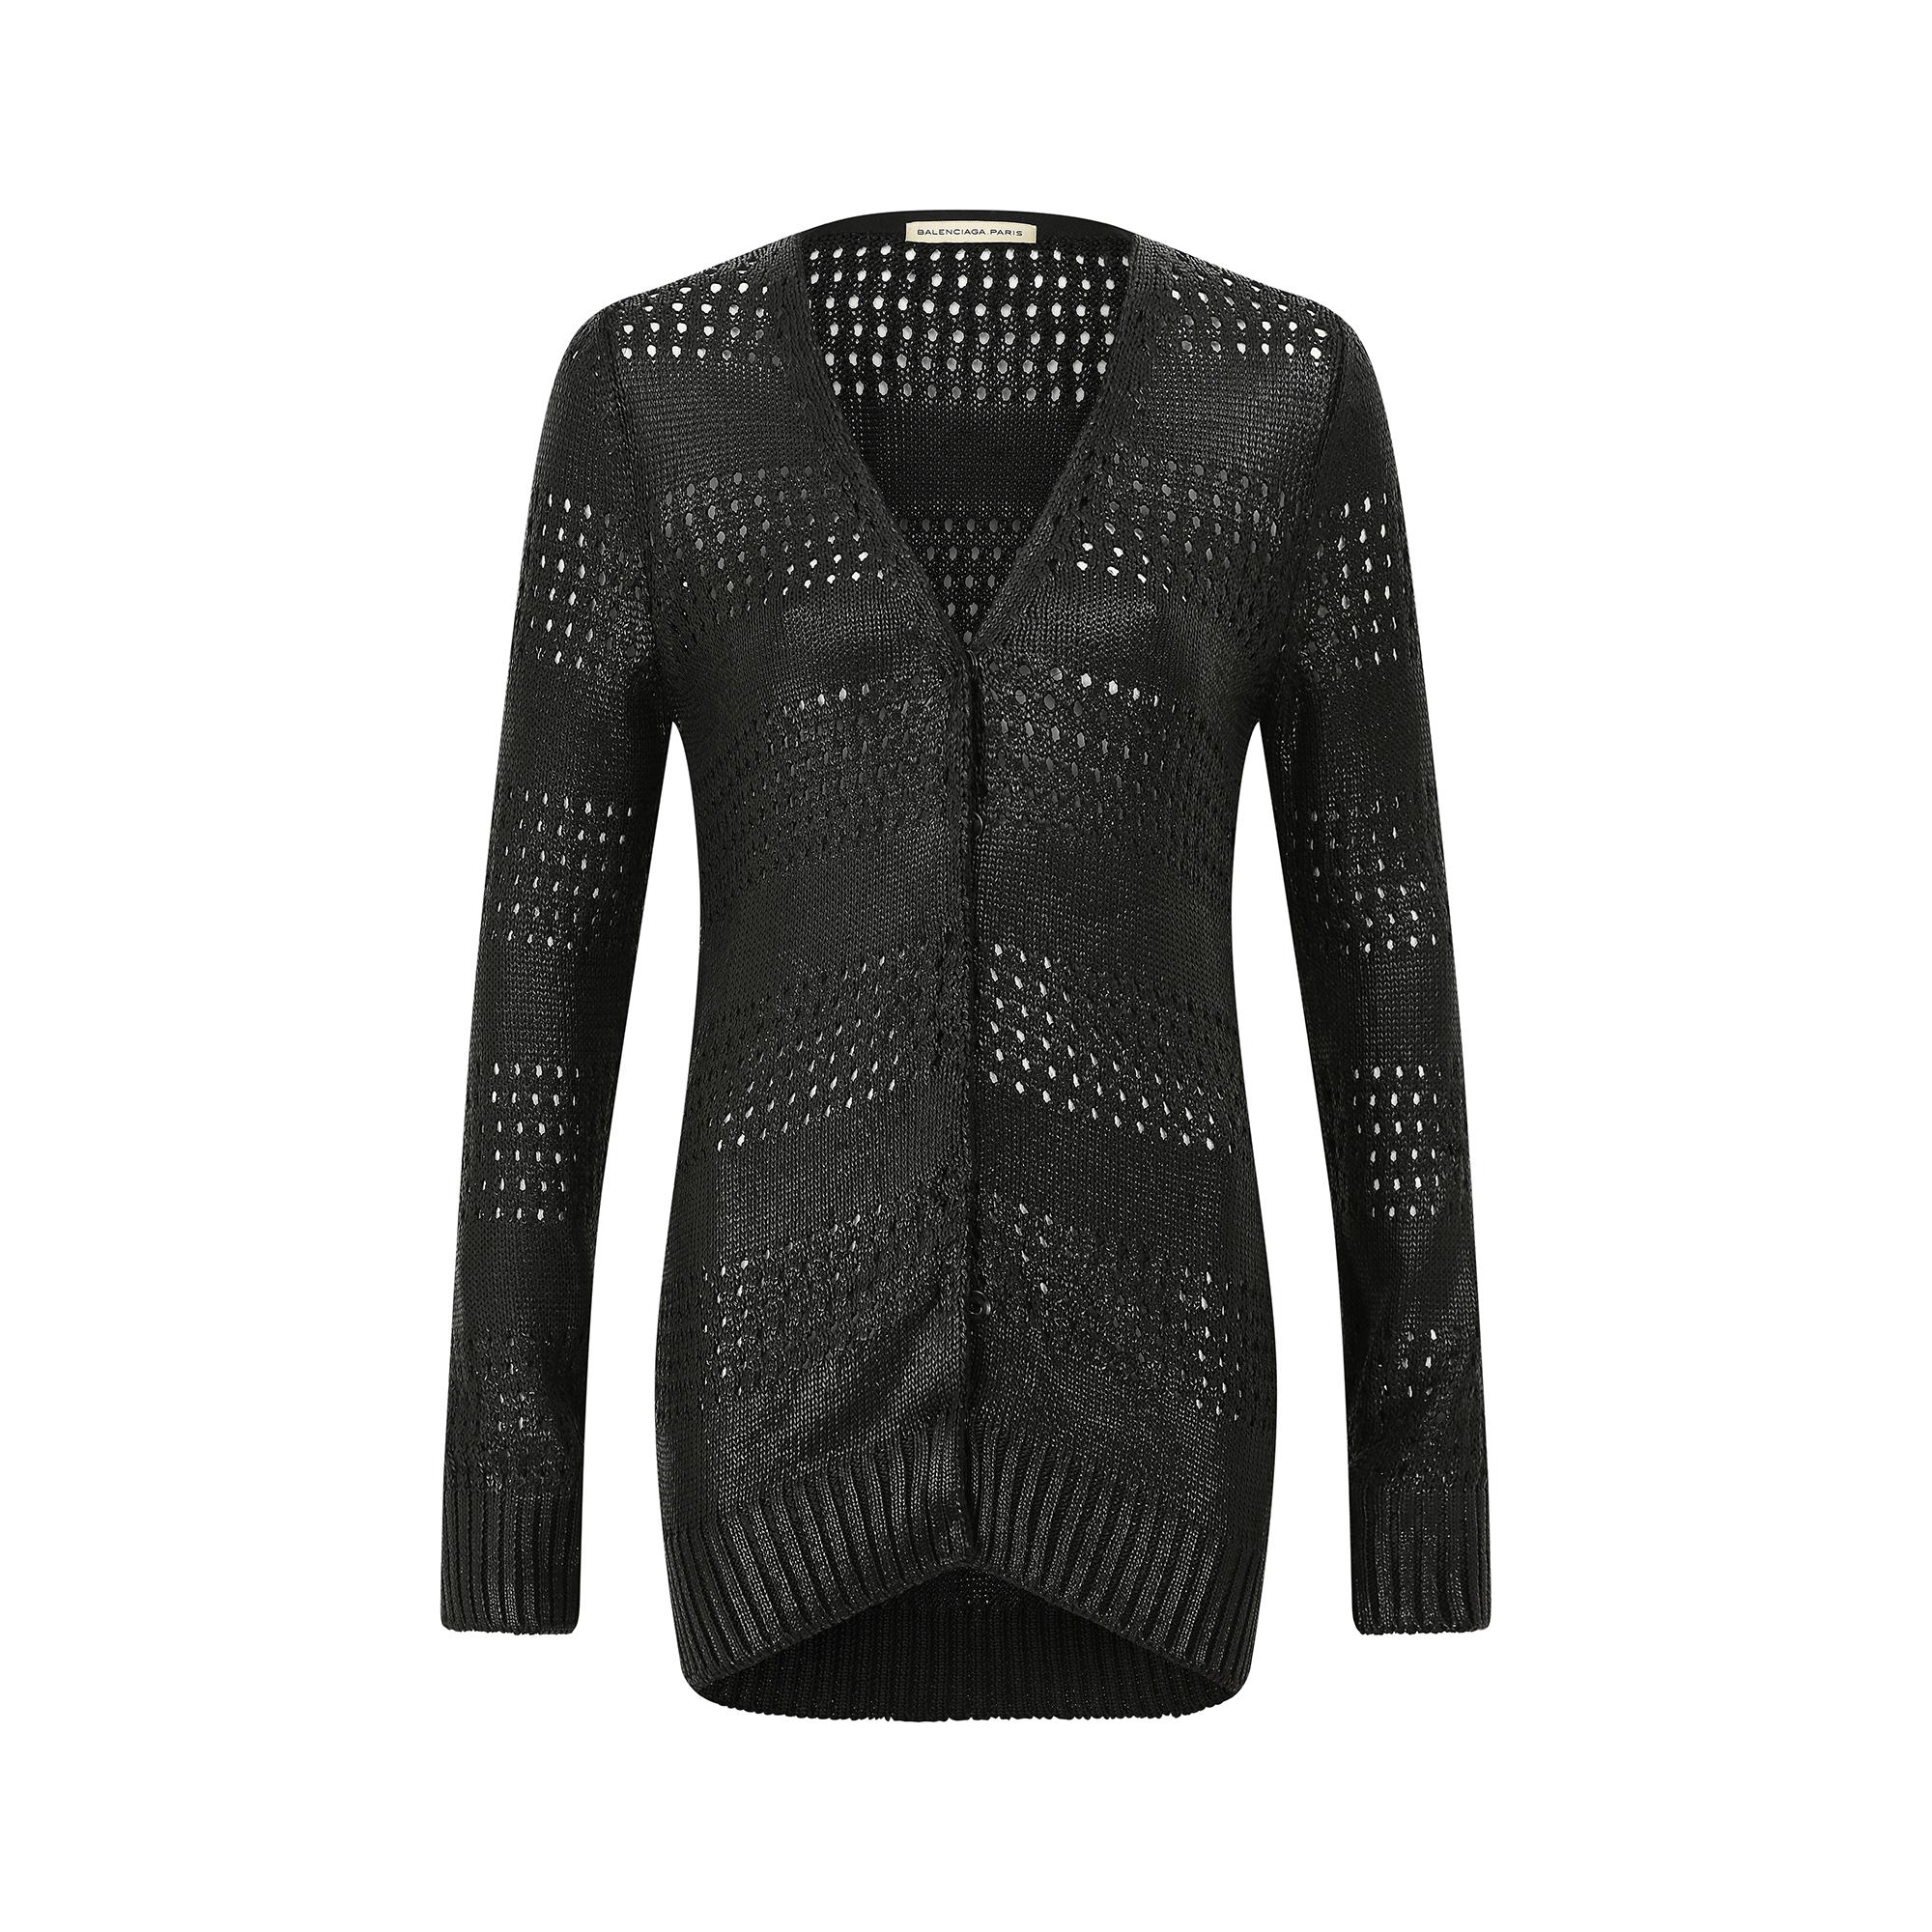 2010 long black knitted cardigan by Nicolas Ghesquière during his time as creative director at Balenciaga.  It has a superb alternating knit design that features horizontal rows of both plain and open style bands.  It has a V-neck and is front